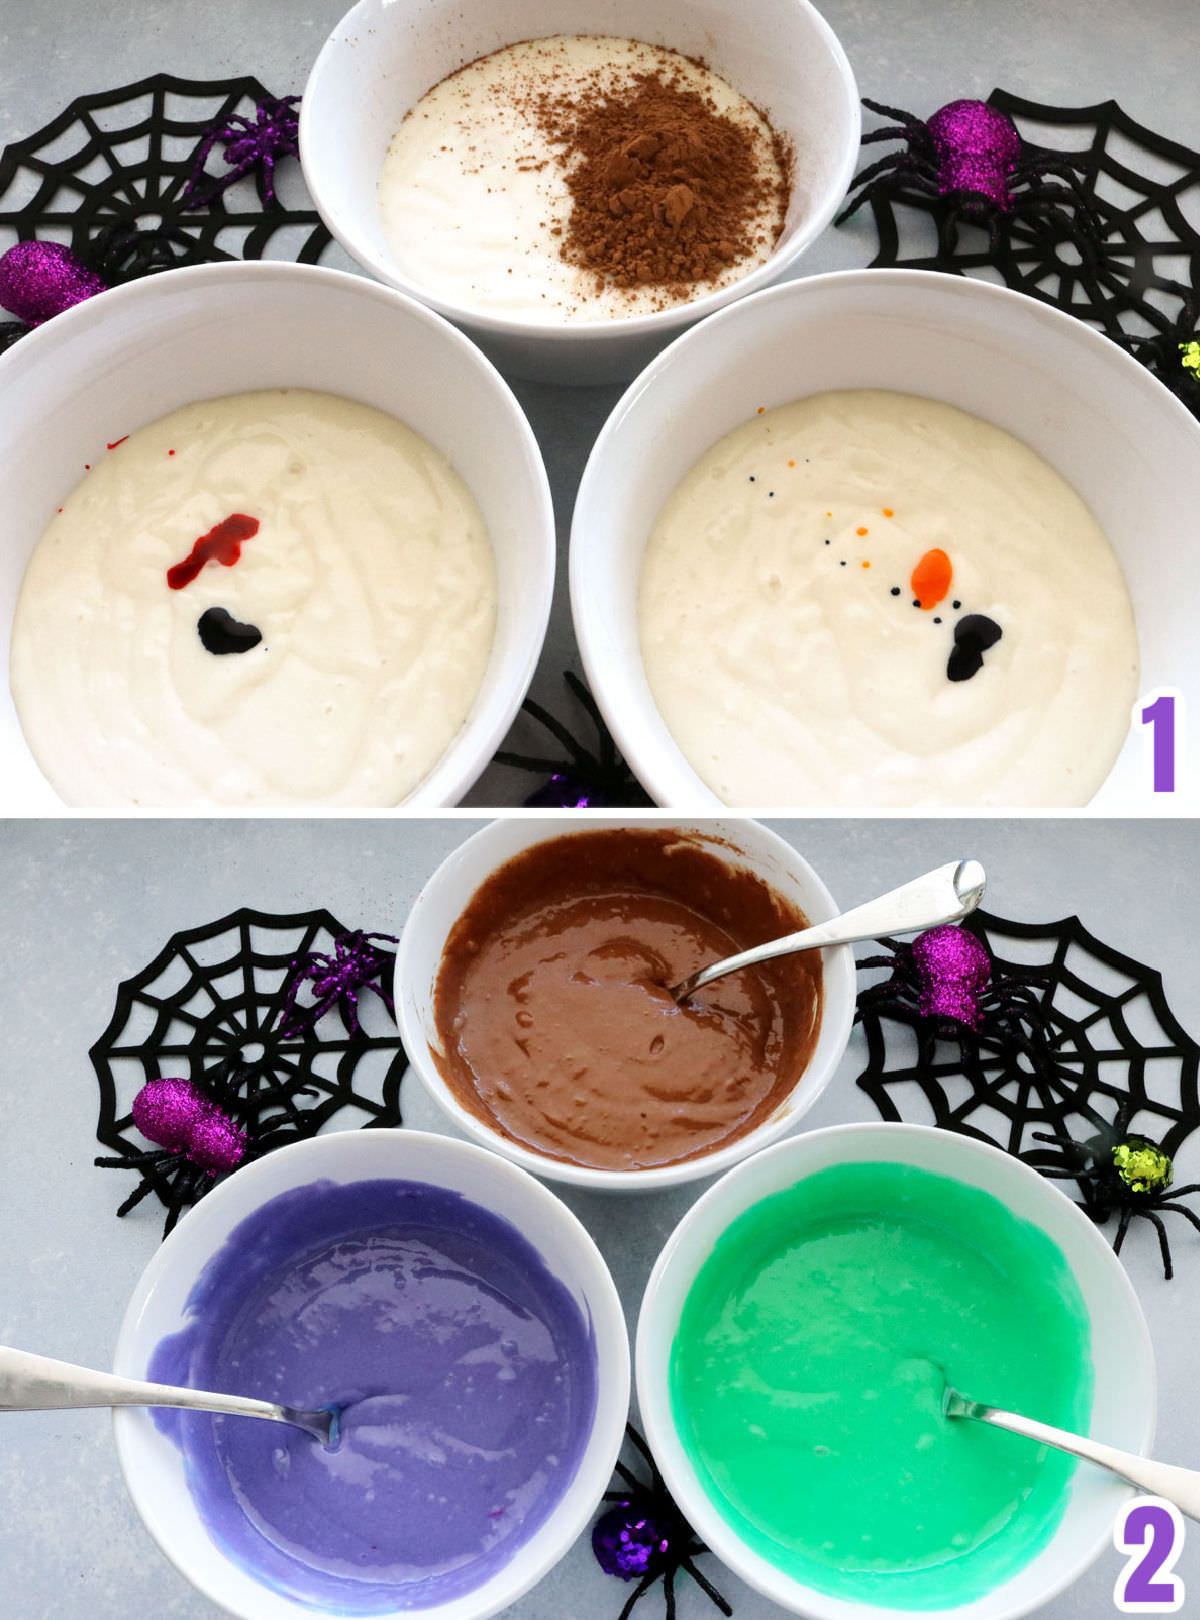 Collage image showing how to portion the cake batter and color it to create a marble effect in a cake.